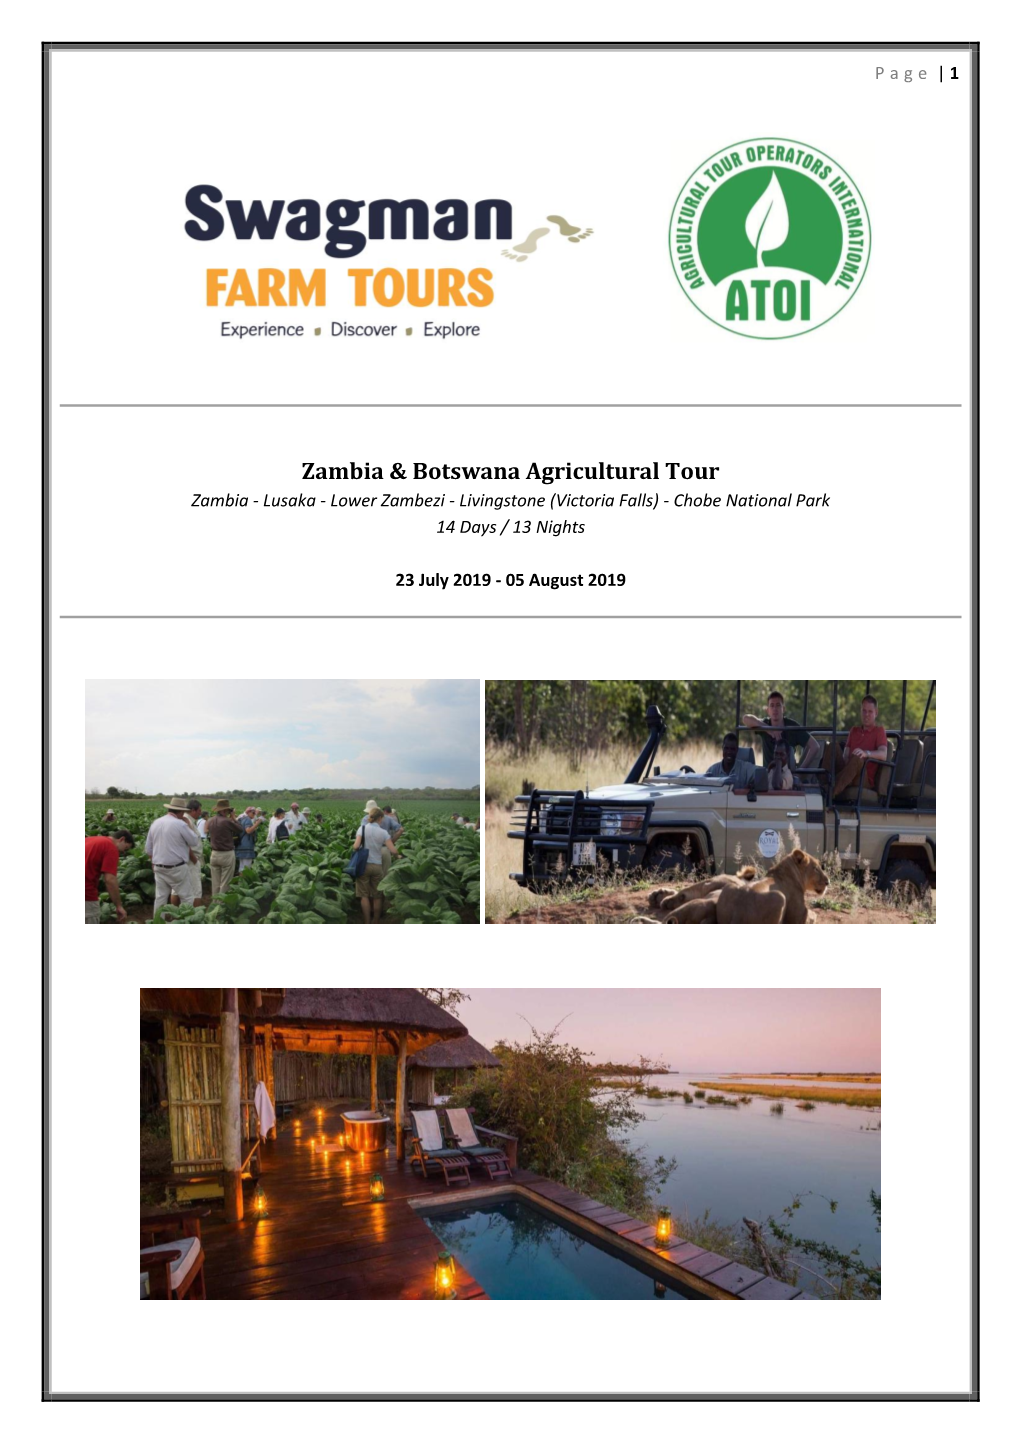 Zambia & Botswana Agricultural Tour